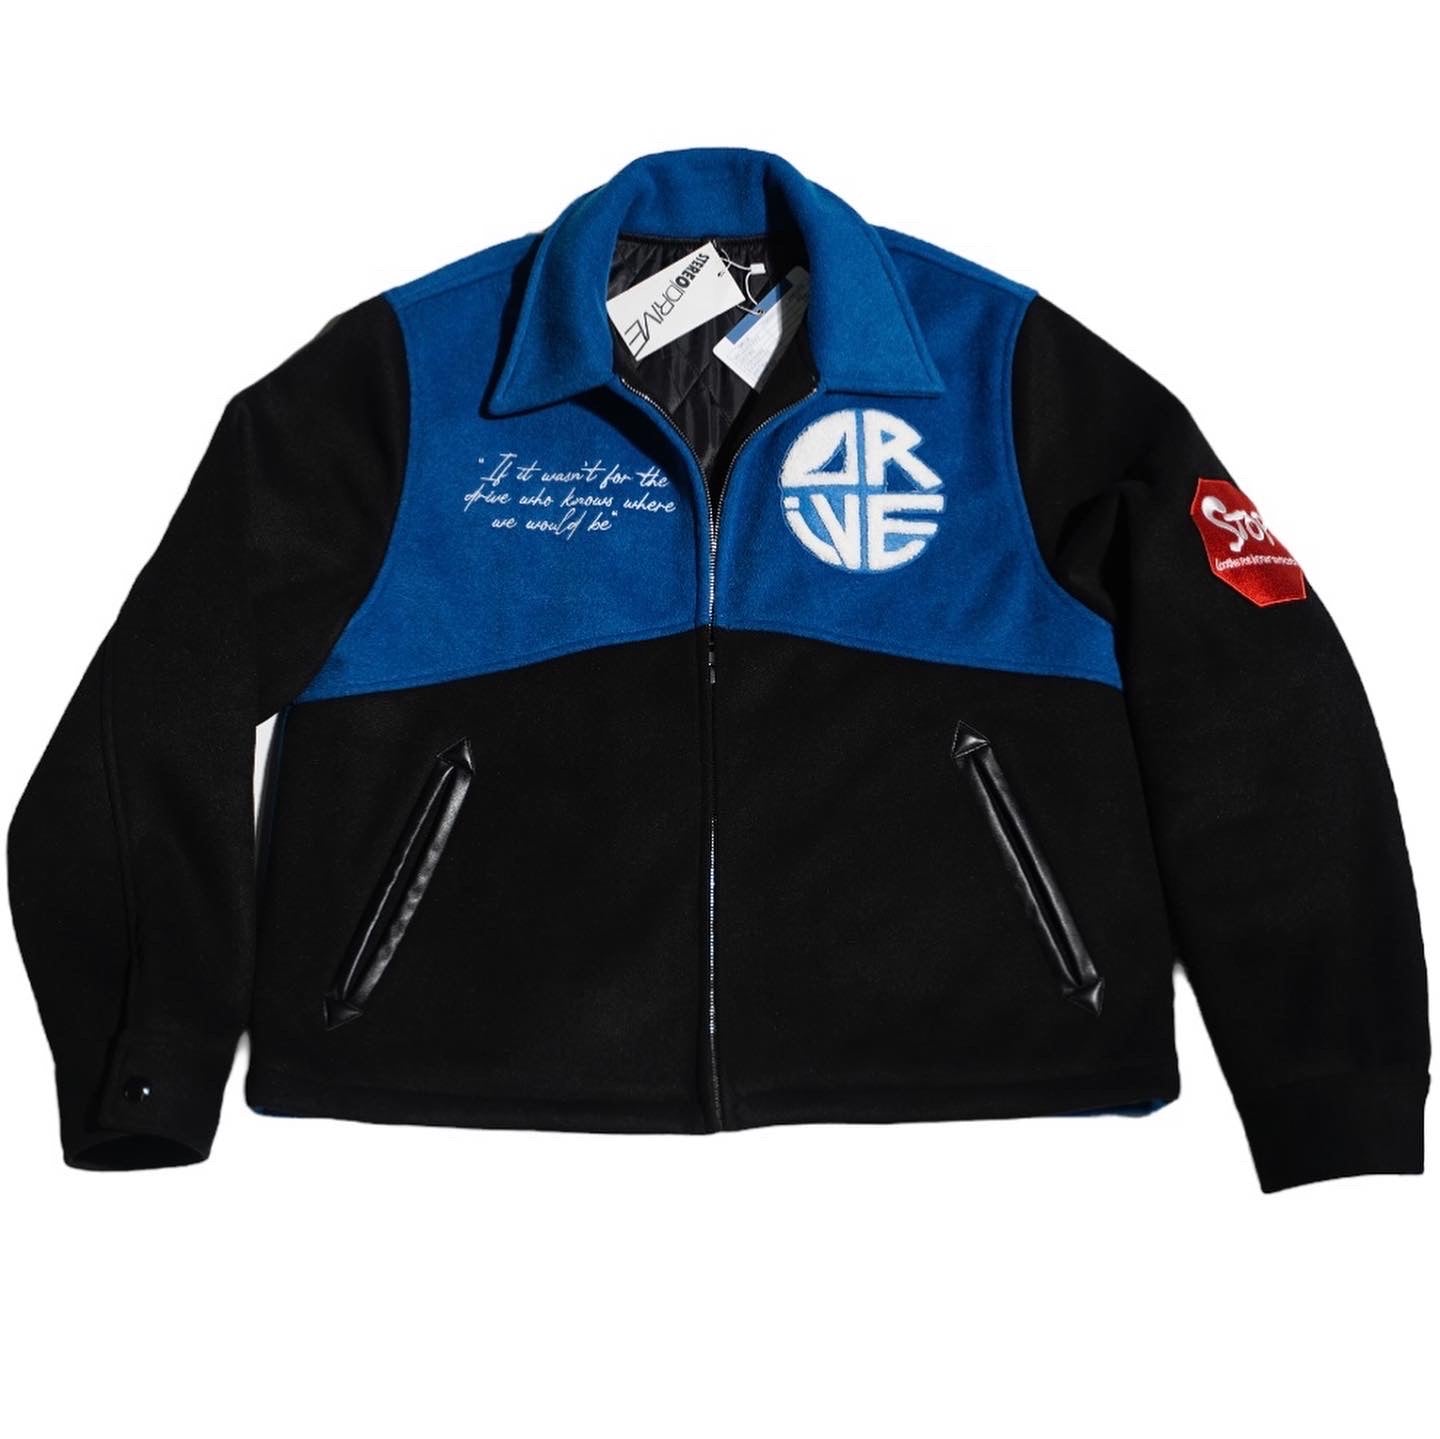 MEN’S “Free Your Drive” Jacket